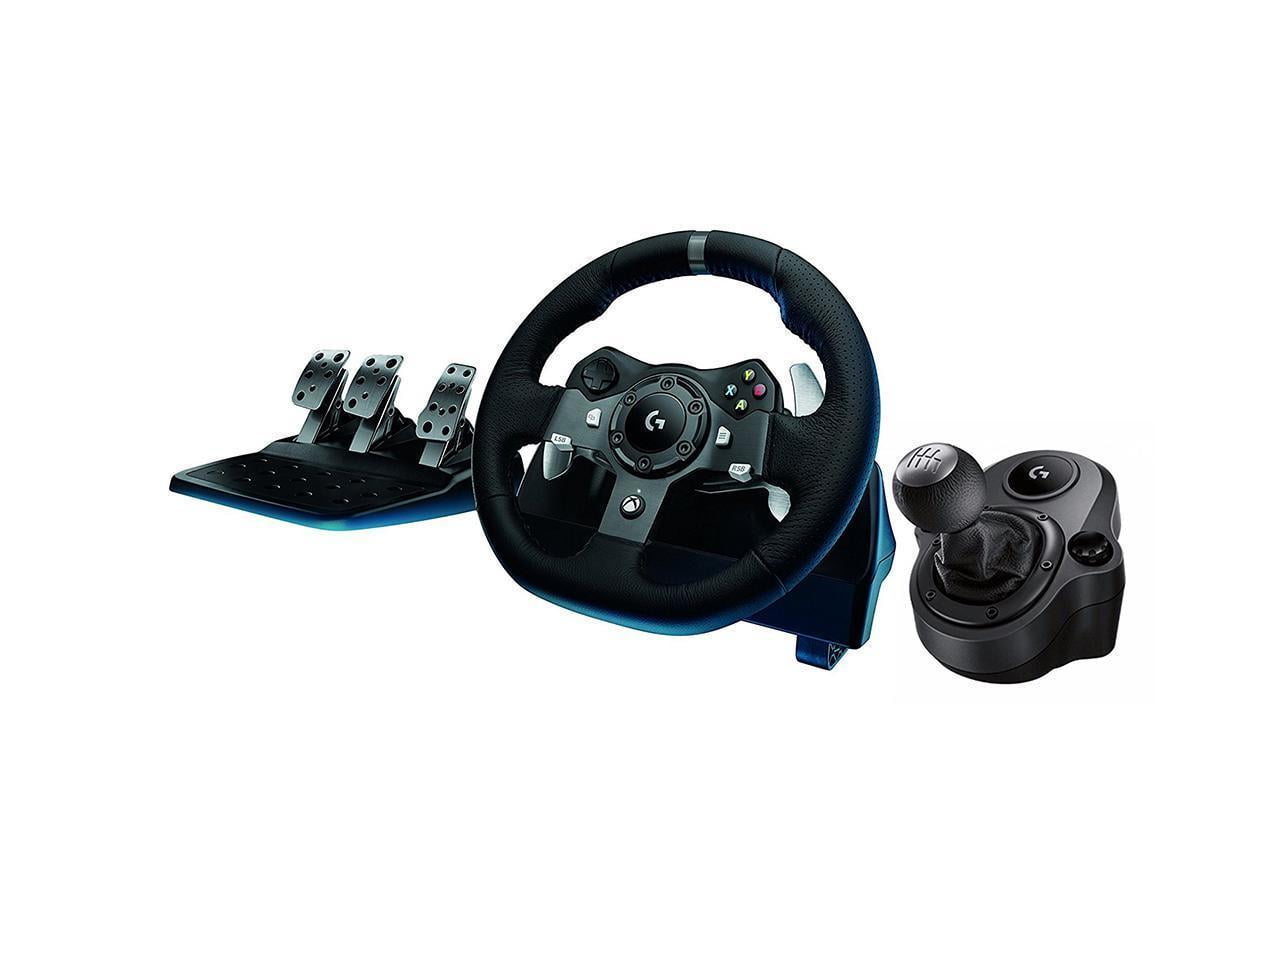 Dynamics strubehoved Alvorlig Logitech G920 Dual-motor Feedback Driving Force Racing Wheel + Responsive  Pedals for Xbox One + Logitech G Driving Force Shifter Compatible with G29  and G920 for Playstation 4, Xbox One and PC -